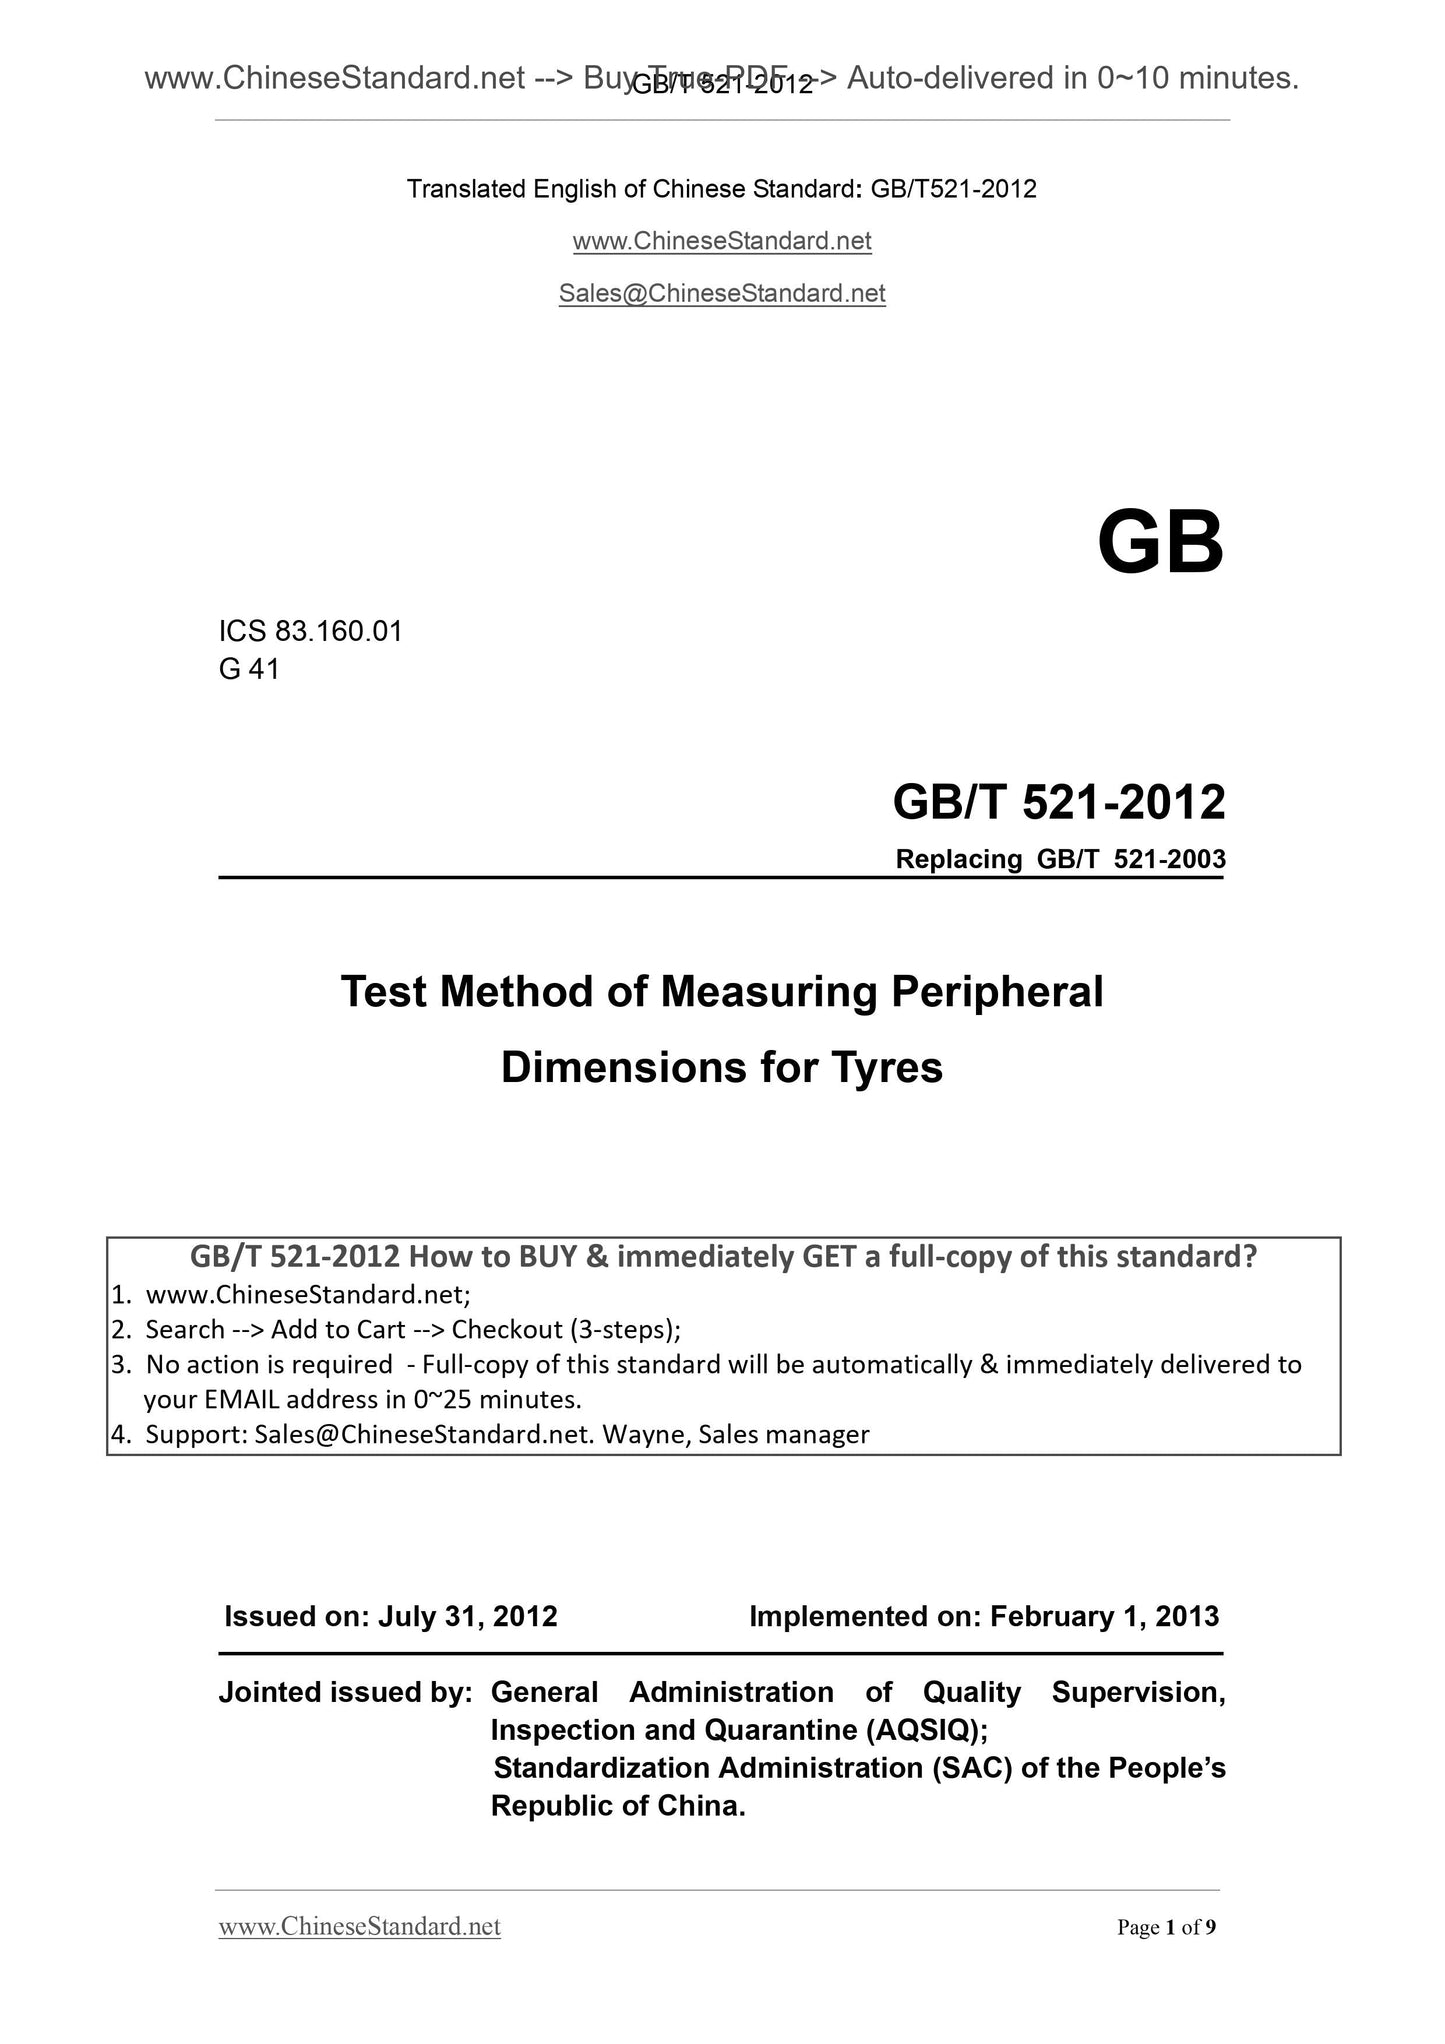 GB/T 521-2012 Page 1